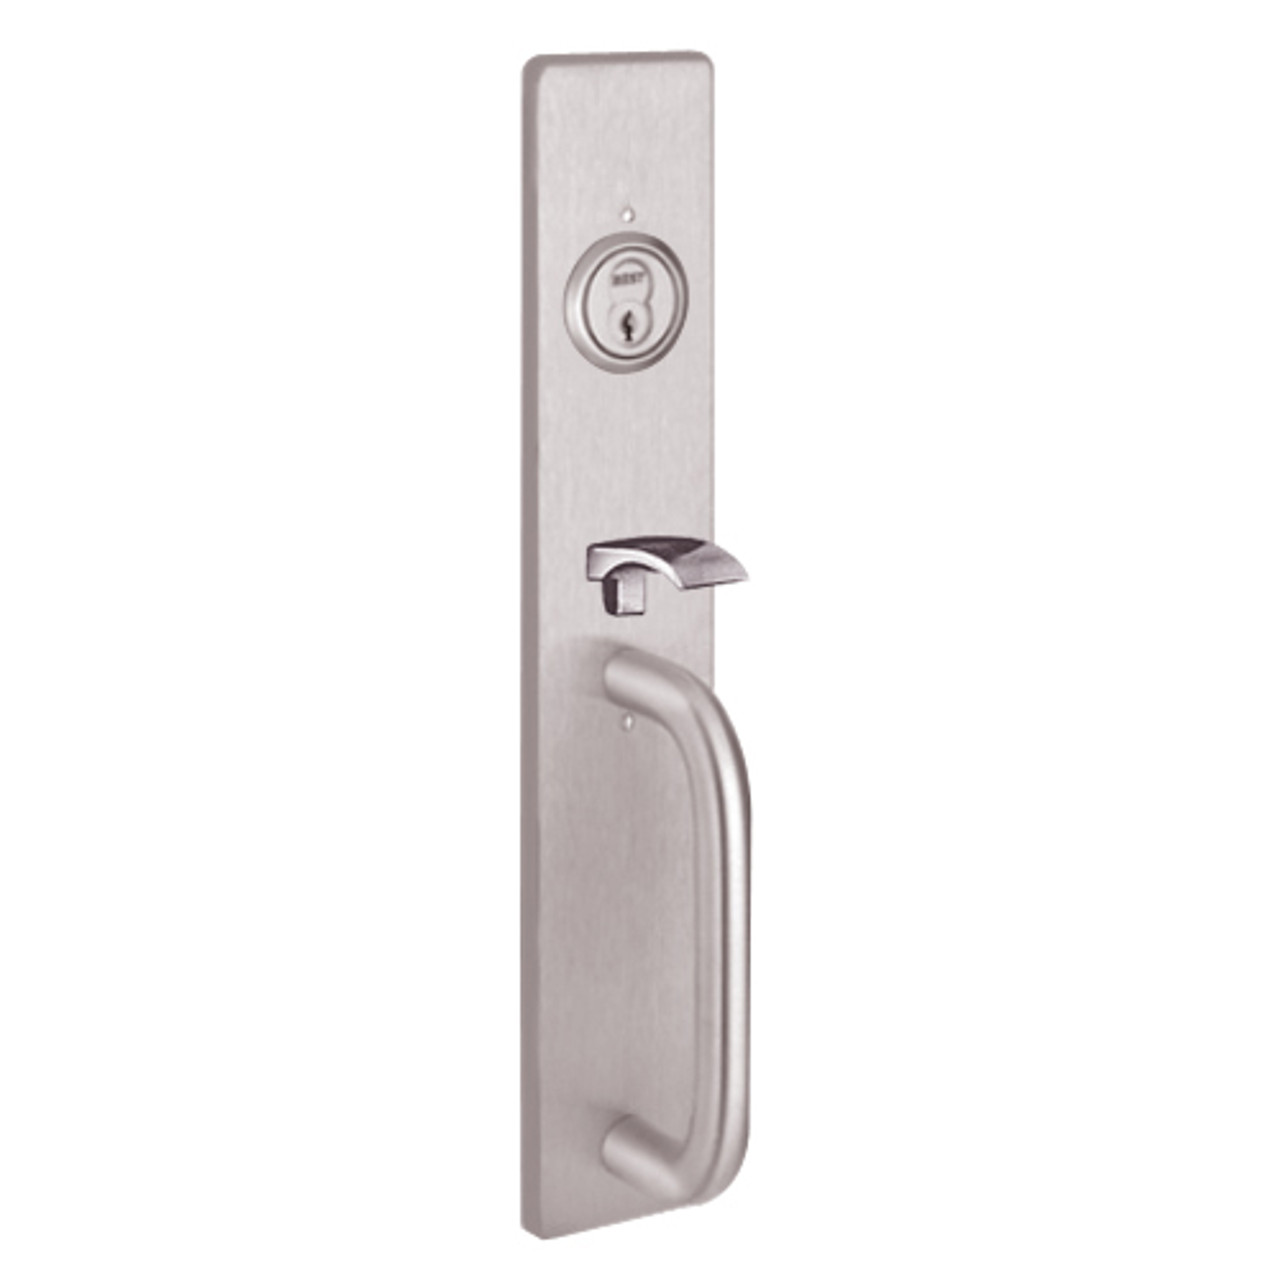 1705C-630 PHI Key Controls Thumb Piece Trim with C Design Pull for Apex and Olympian Series Exit Device in Satin Stainless Steel Finish